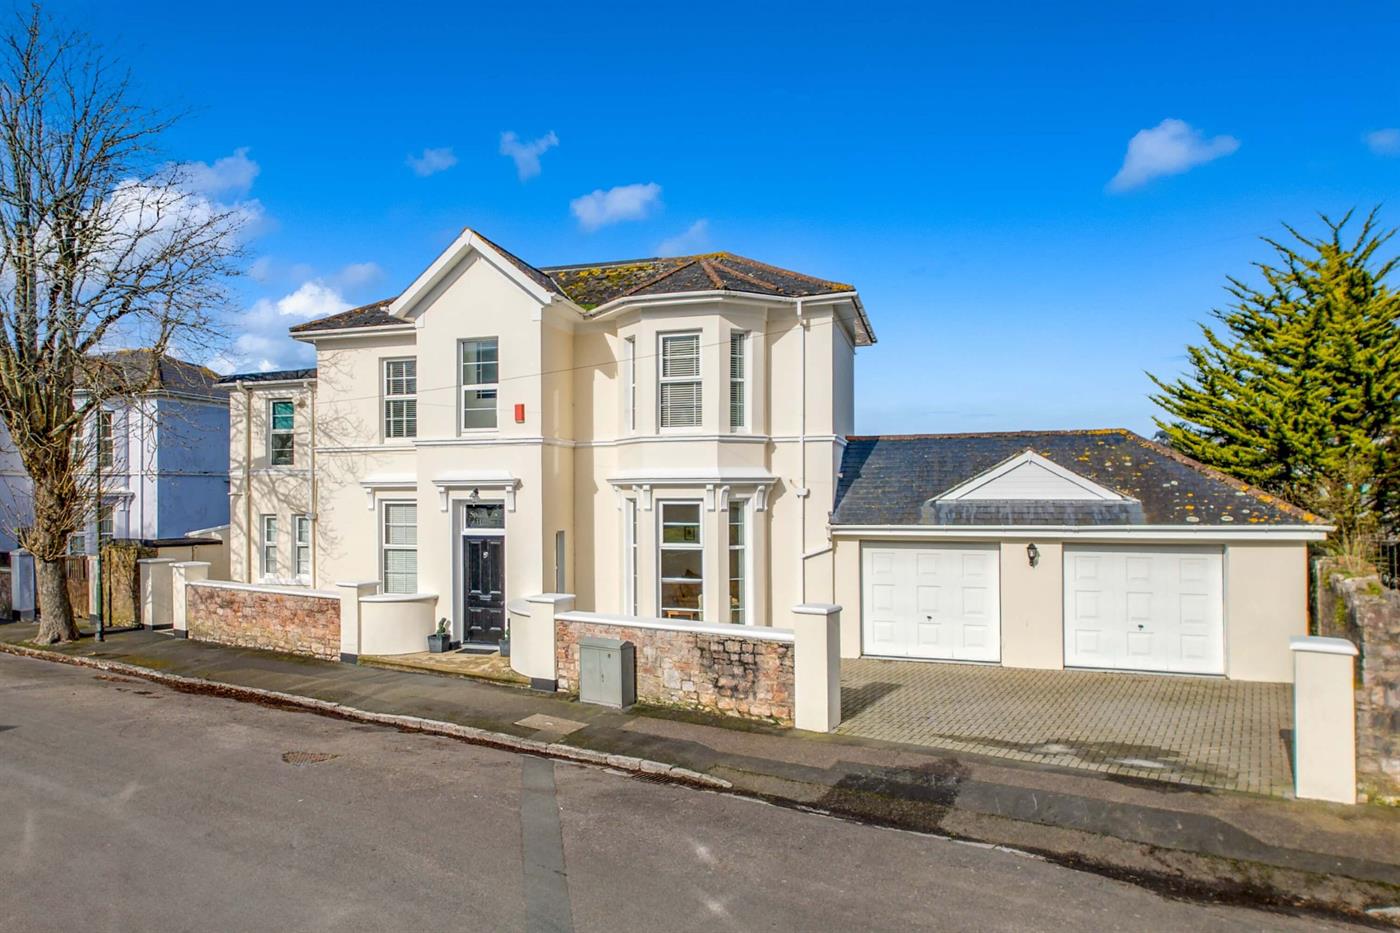 7 Bedroom Detached House for Sale: Springfield, St. Lukes Road North, Torquay, TQ2 5PD